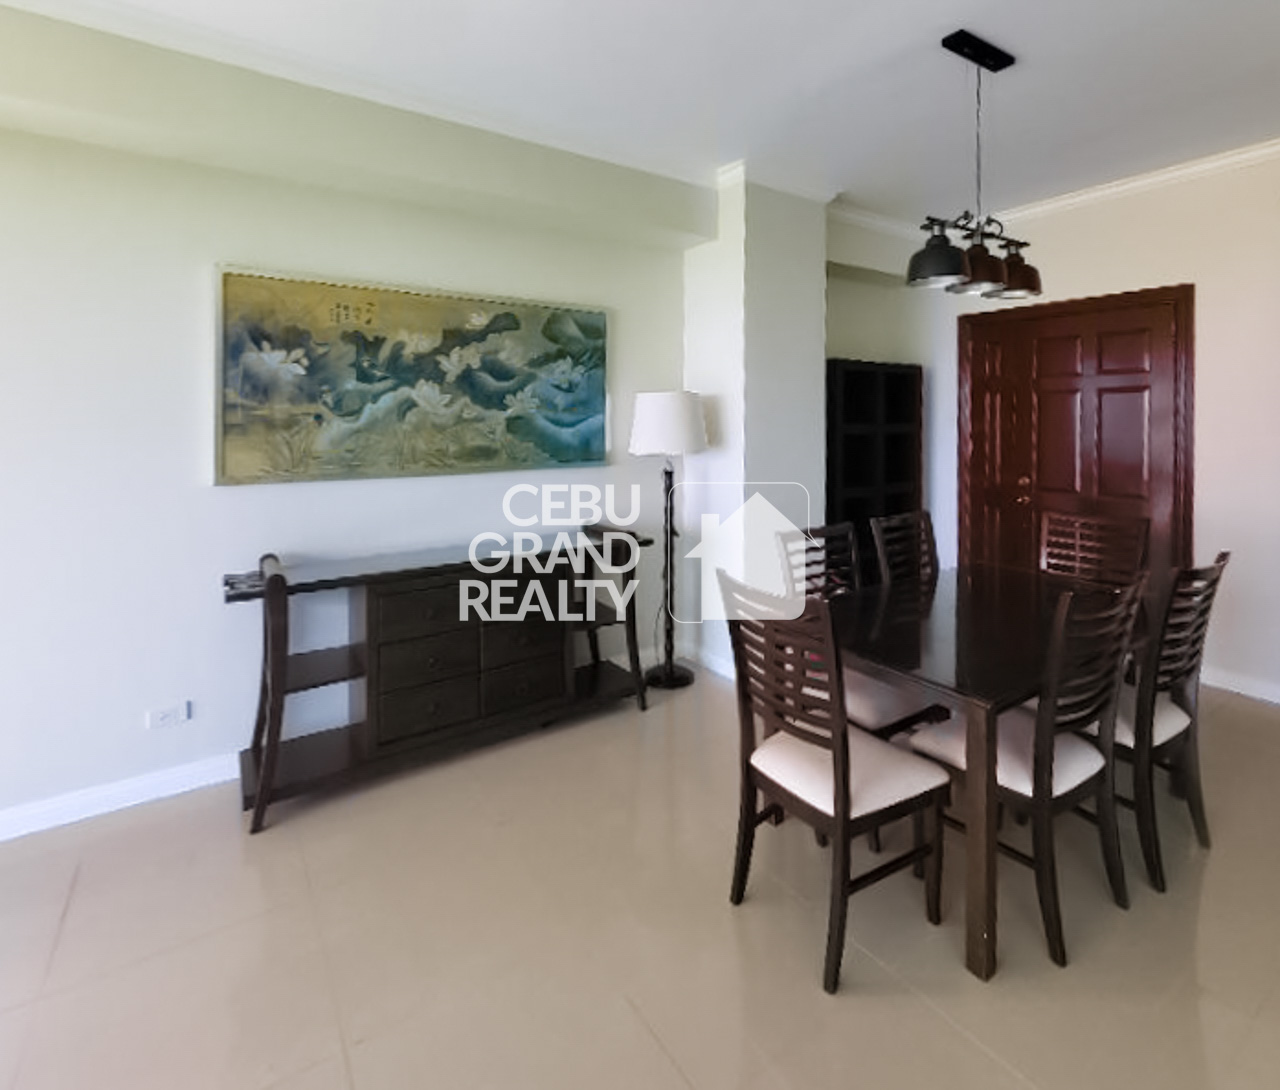 SRBCL9 Semi-Furnished 2 Bedroom Condo for Sale in Citylights Gardens - 3